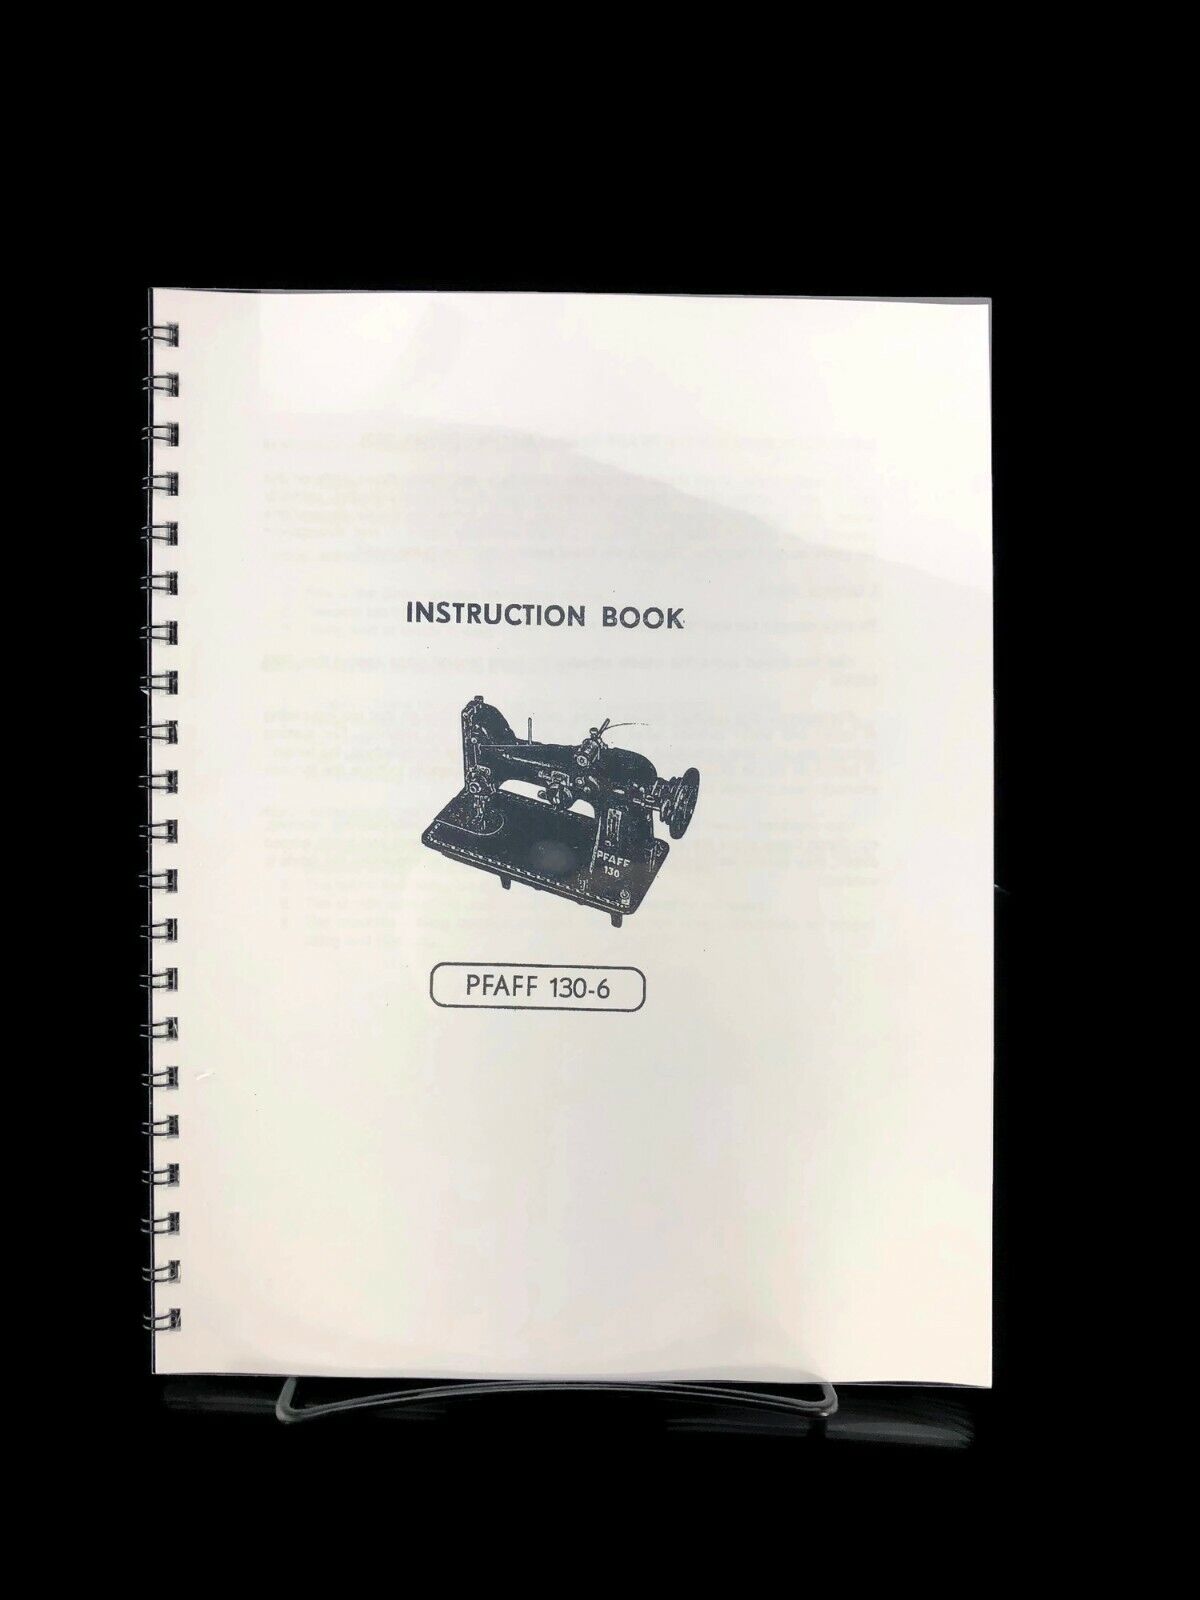 PFAFF 130-6 Instruction Manual for Sewing Machine Digitally Remastered